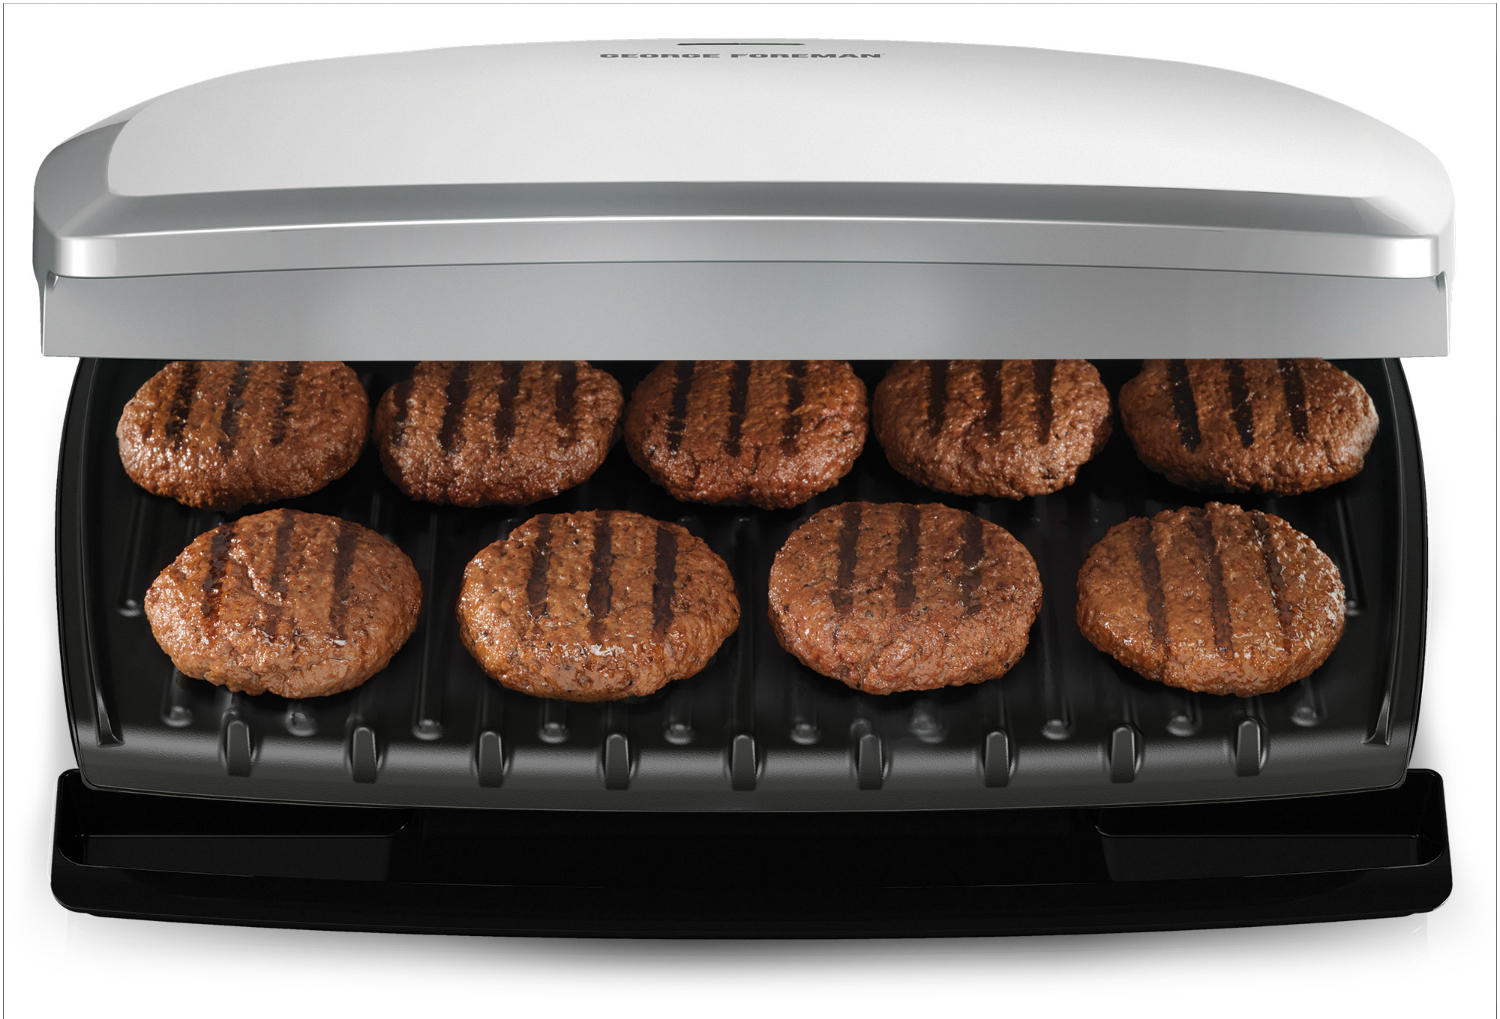 https://www.digitaltrends.com/wp-content/uploads/2019/05/george-foreman-9-serving-classic-plate-grill-and-panini-press-1.jpg?p=1